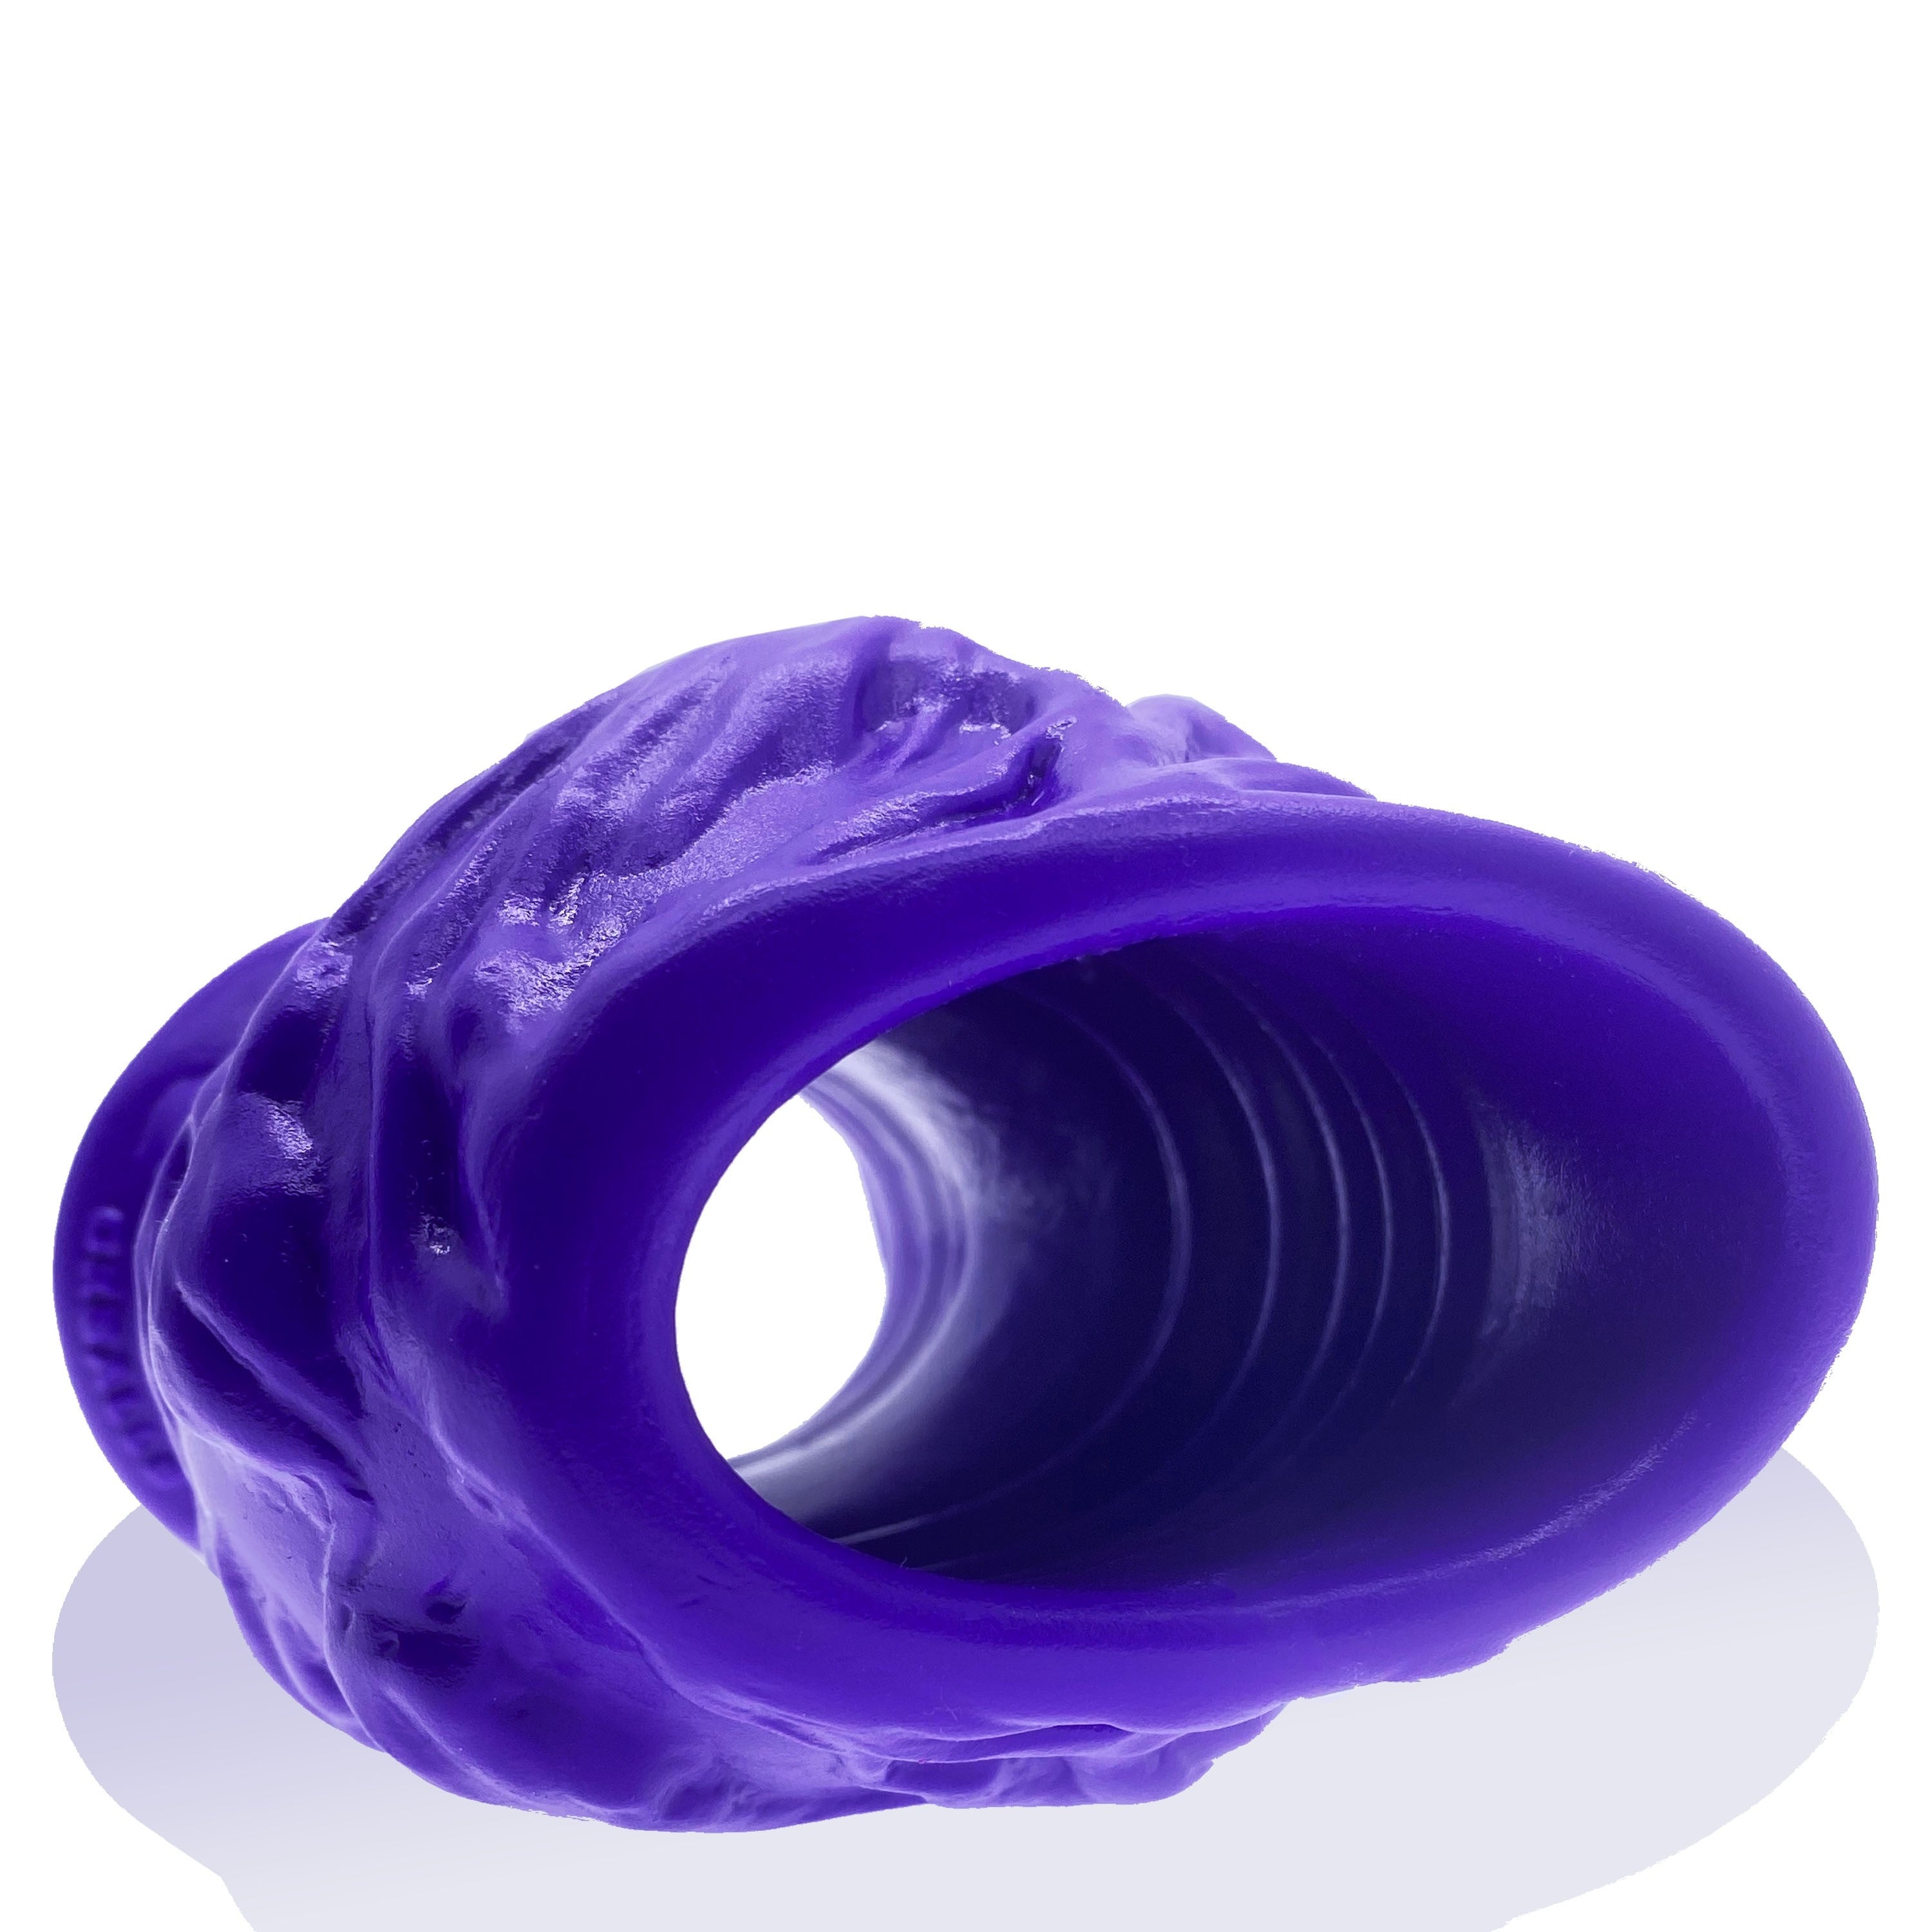 Oxballs Pig Hole Squeal FF • Silicone Butt Plug